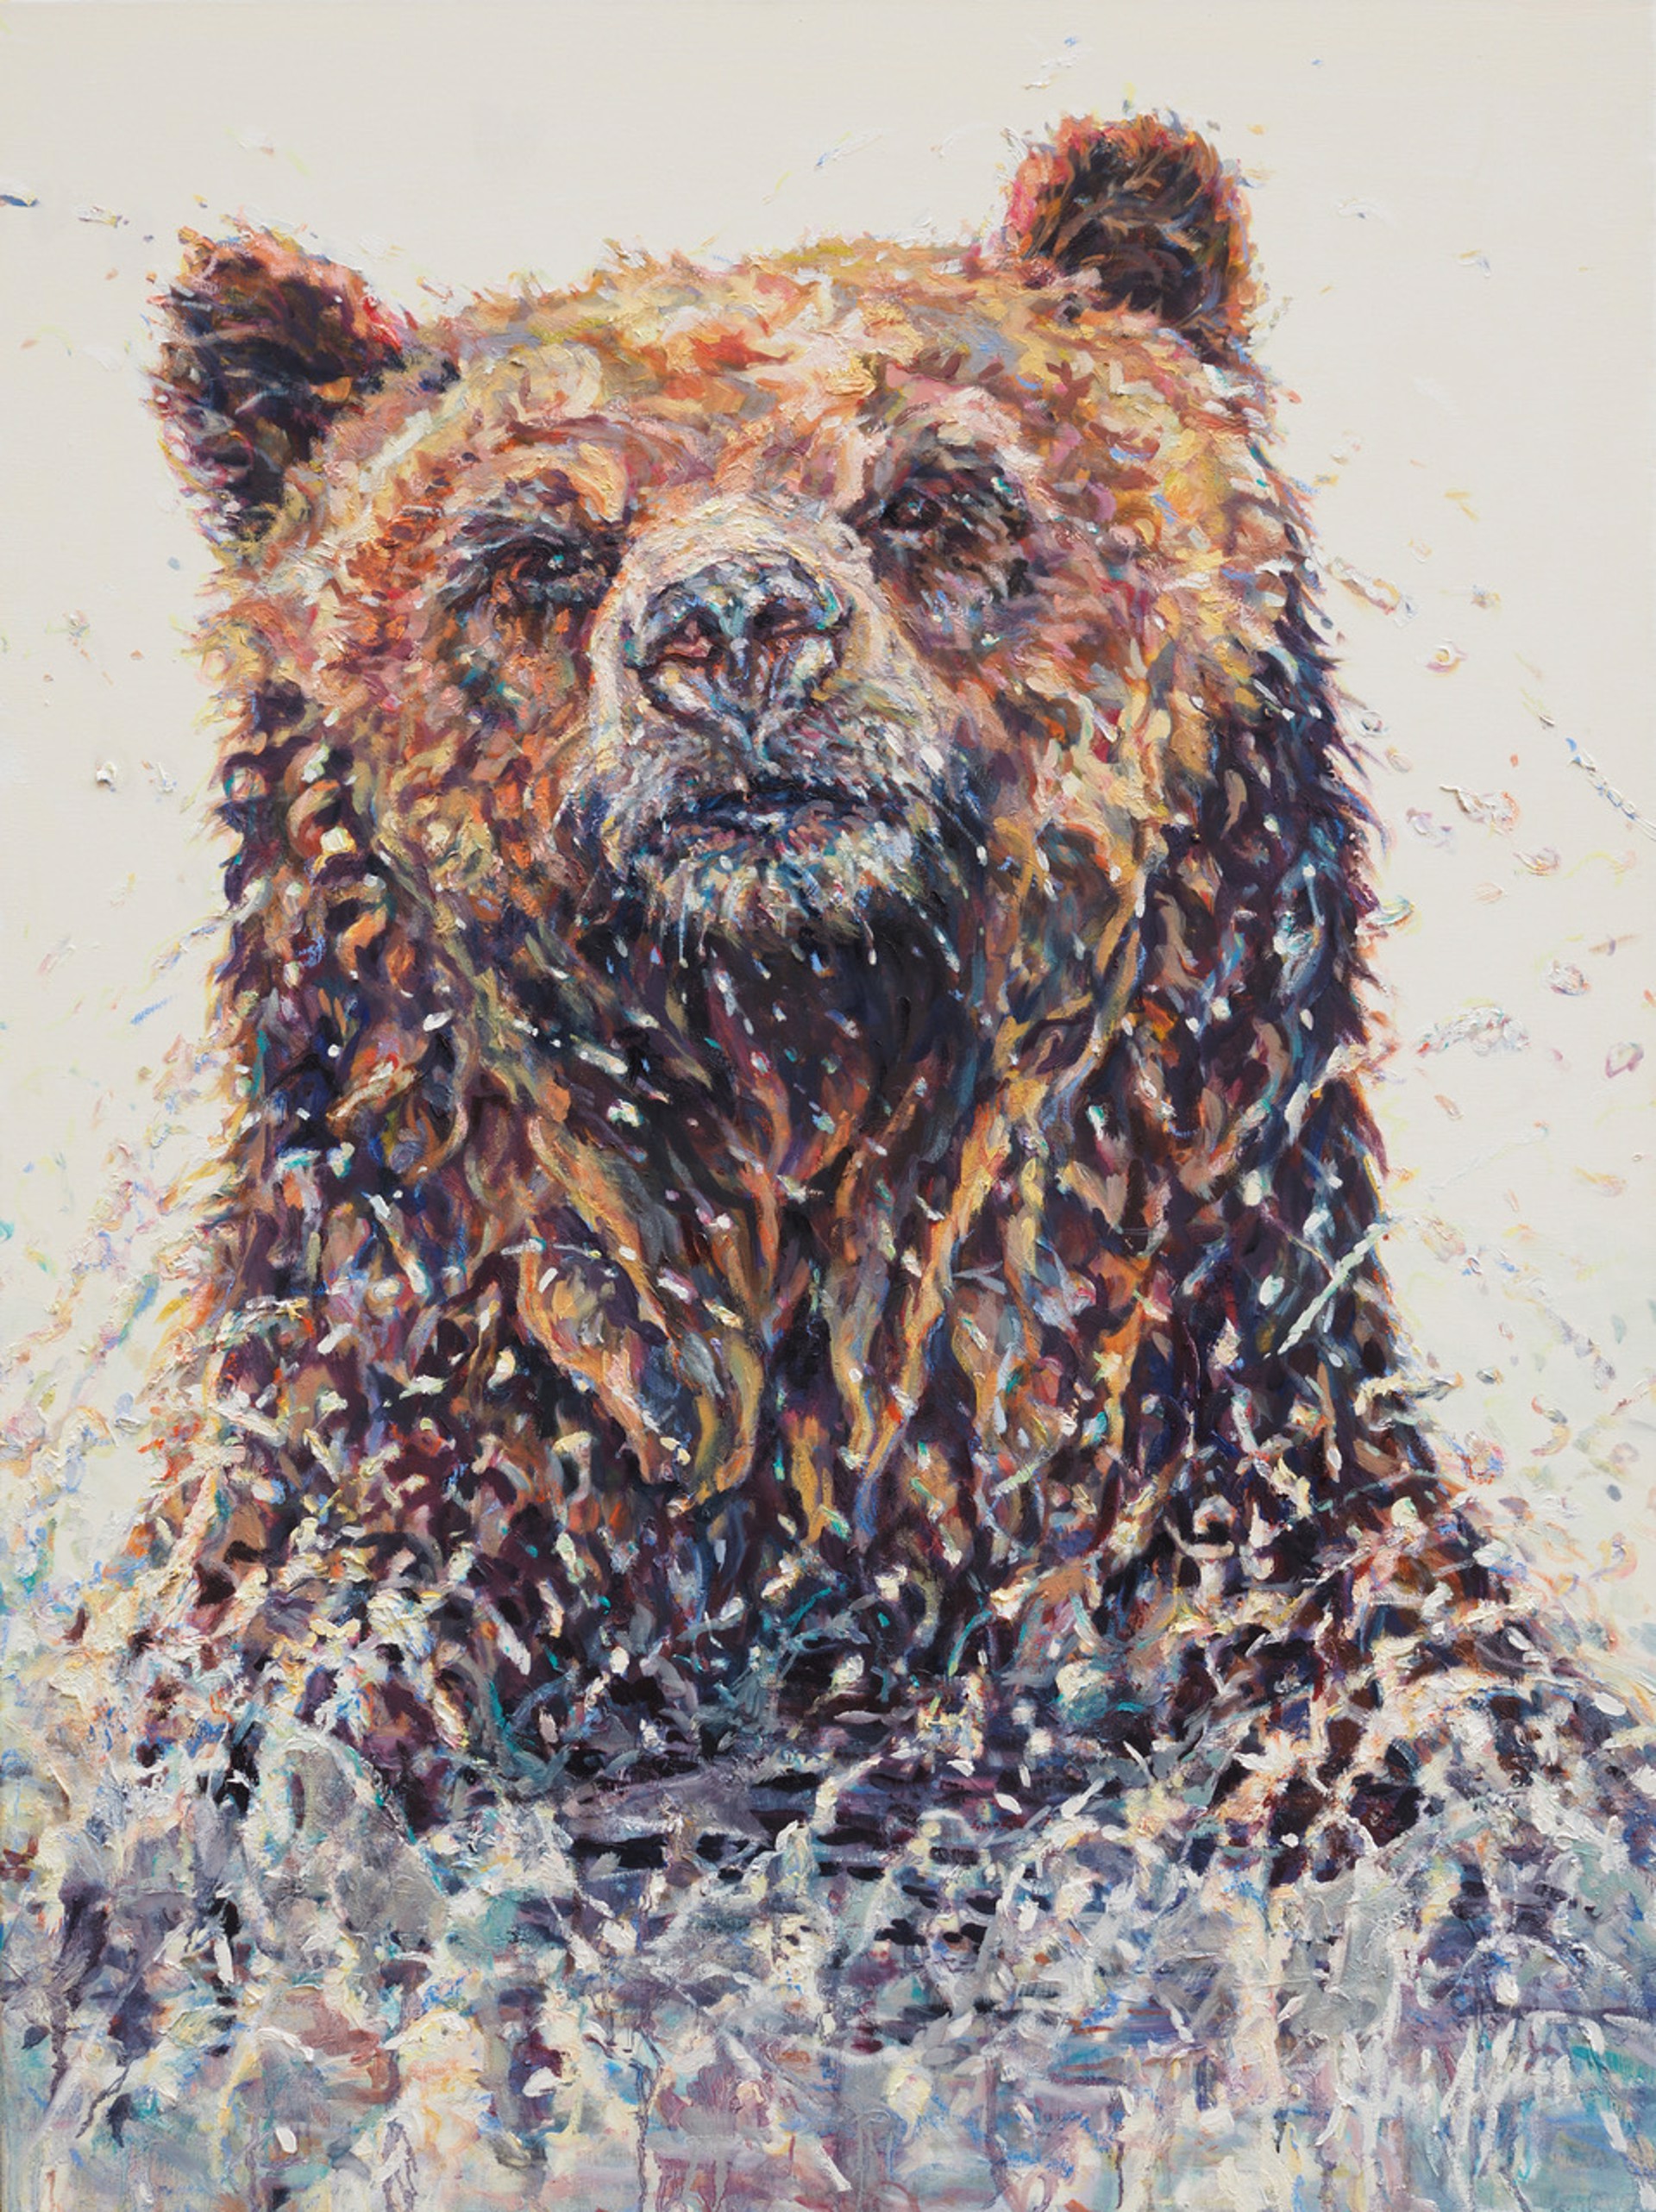 A Original Painting Of A Wet Colorful Bear Head Slashing Out Of Water By Patricia A Griffin Available At Gallery Wild